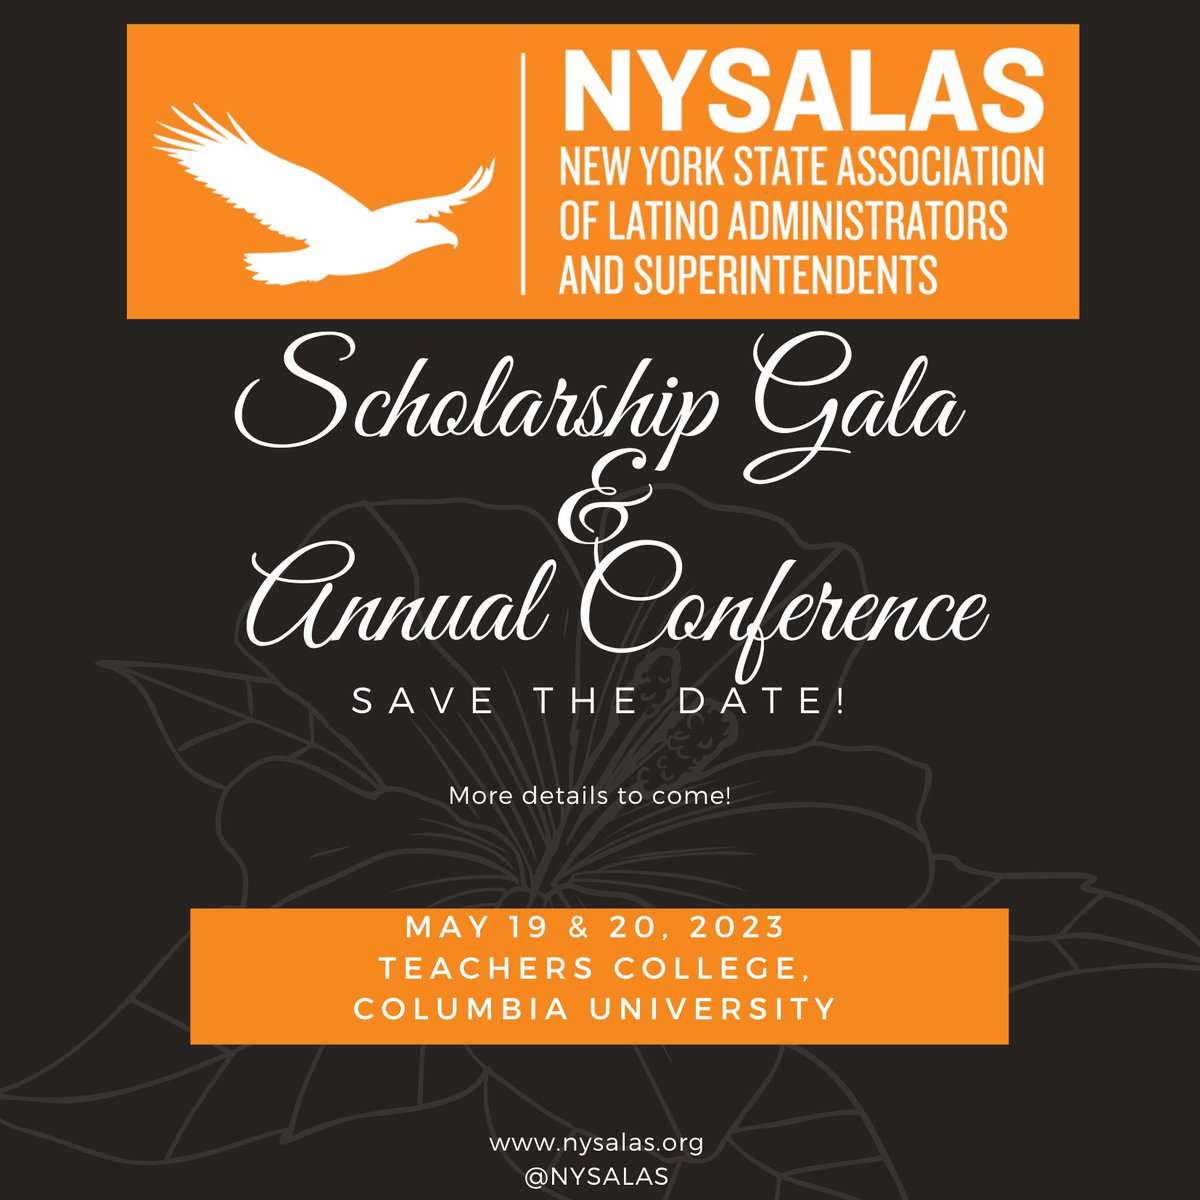 SAVE the DATES: Scholarship Gala and Annual Conference. More info to come! #takingFlight🦅 #LatinoLeadership #NYSALAS